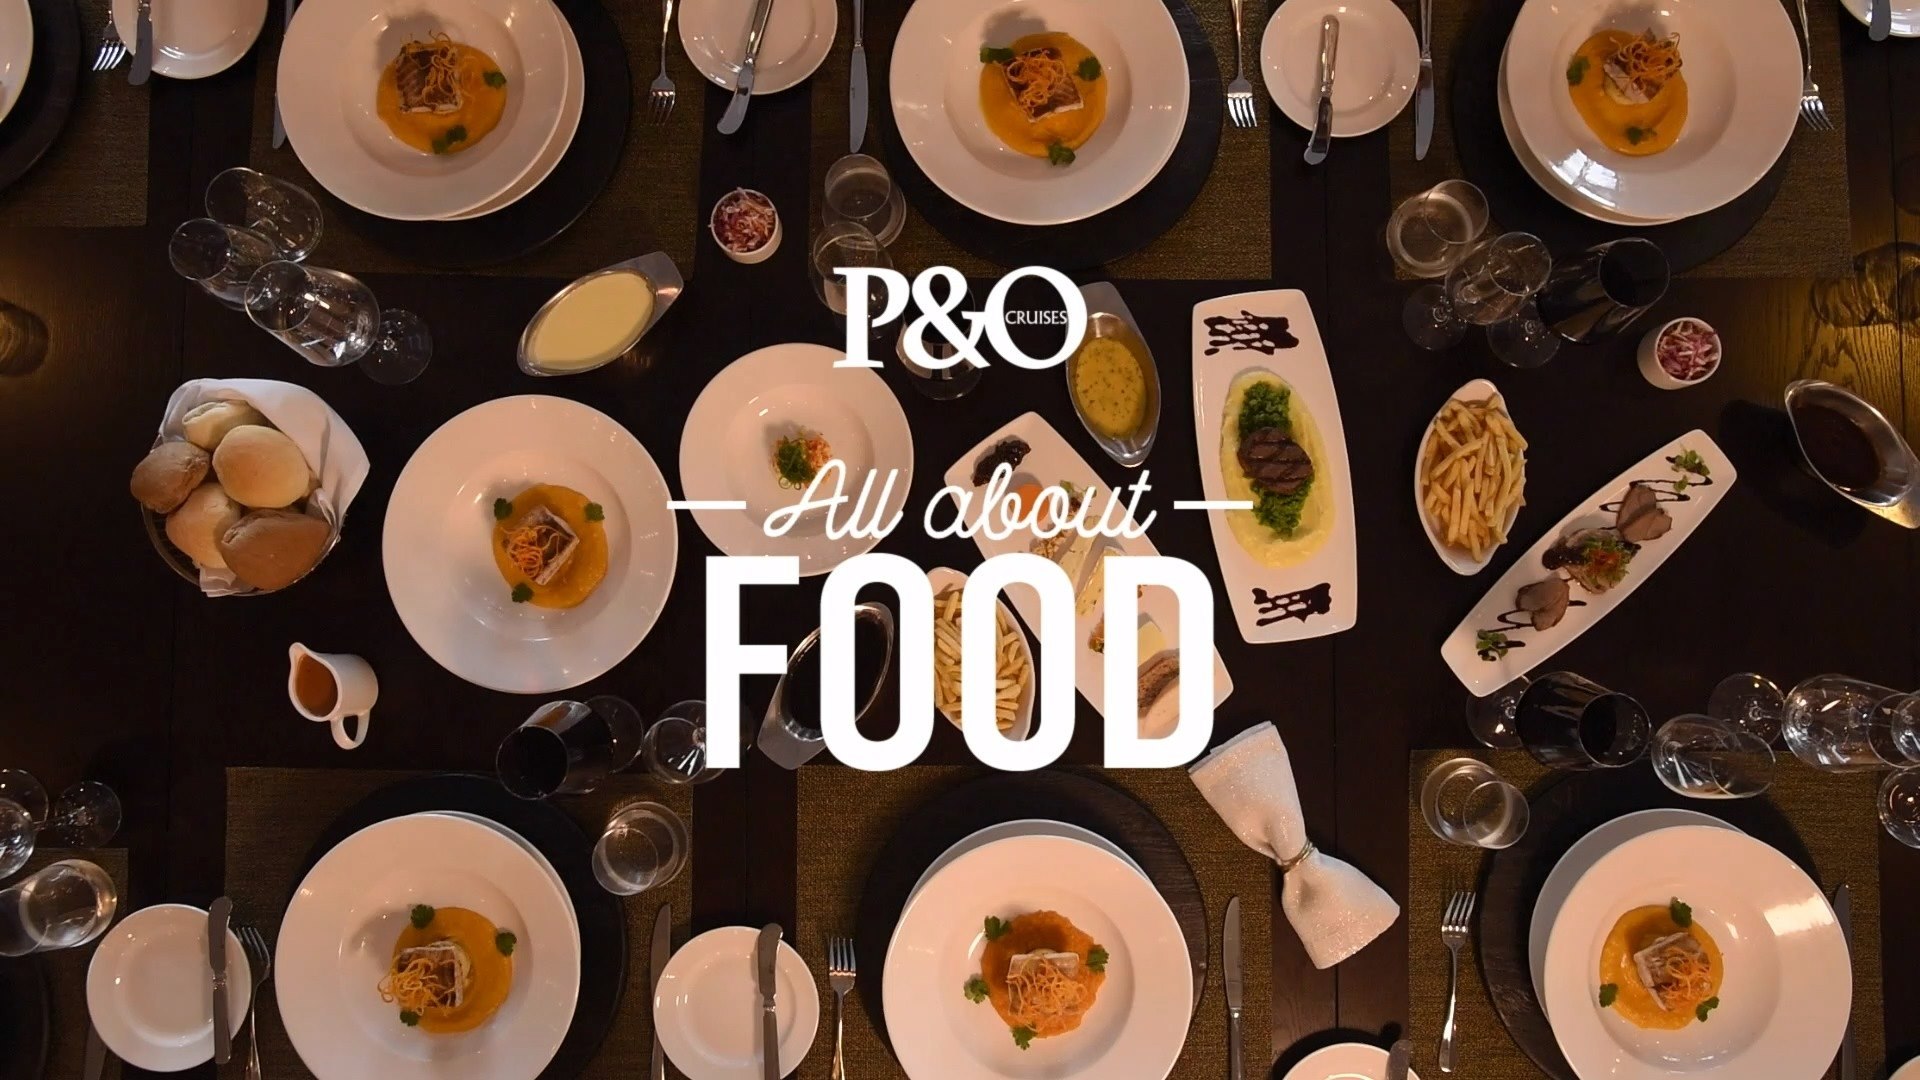 12 FREE Dining experiences on P&O Cruise experiences